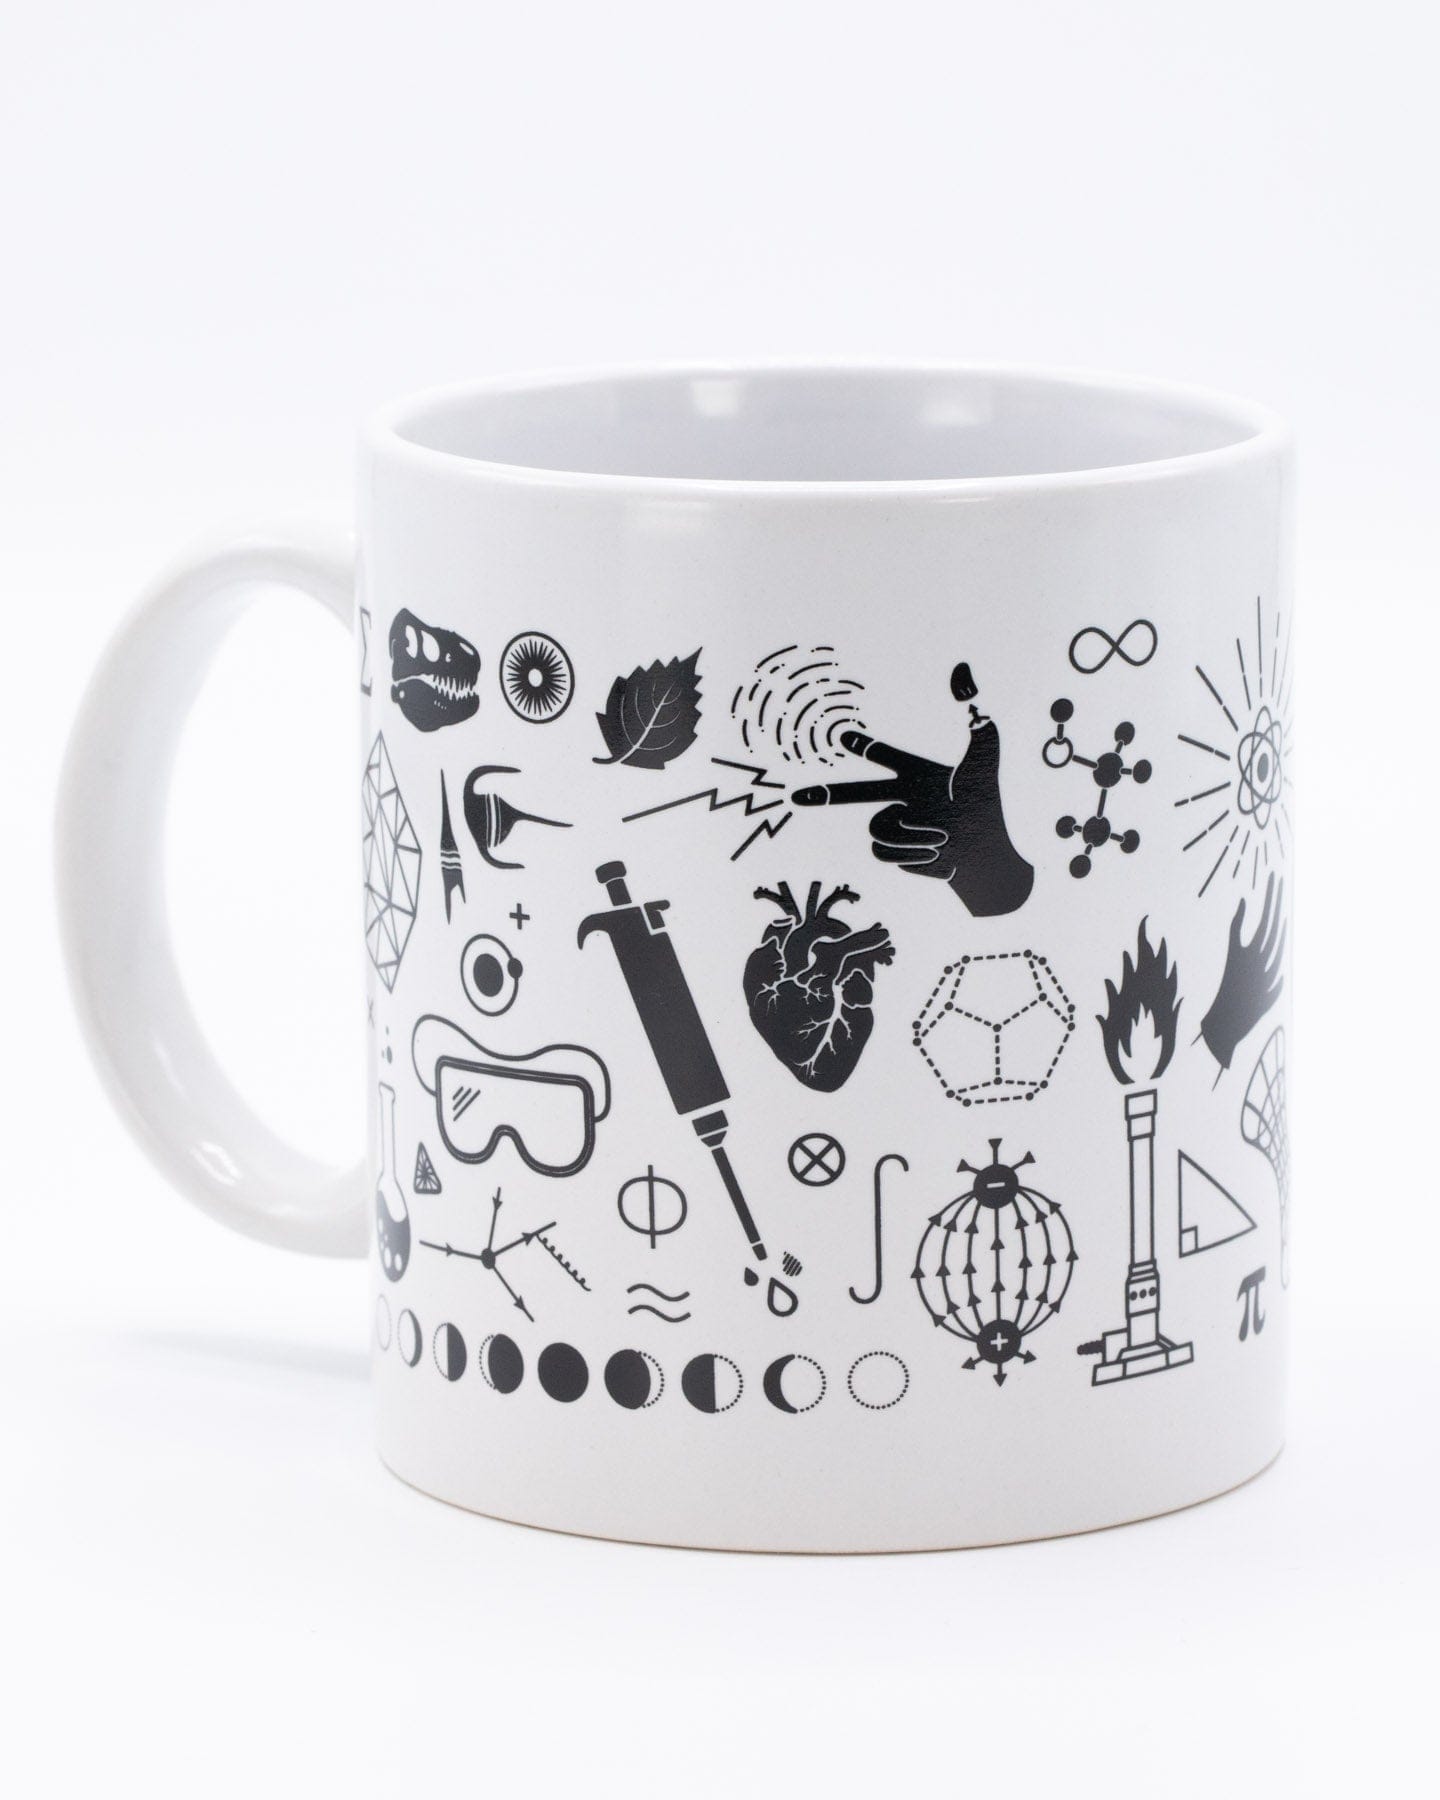 You Are the Carbon They Want to Reduce 11oz Black Mug 